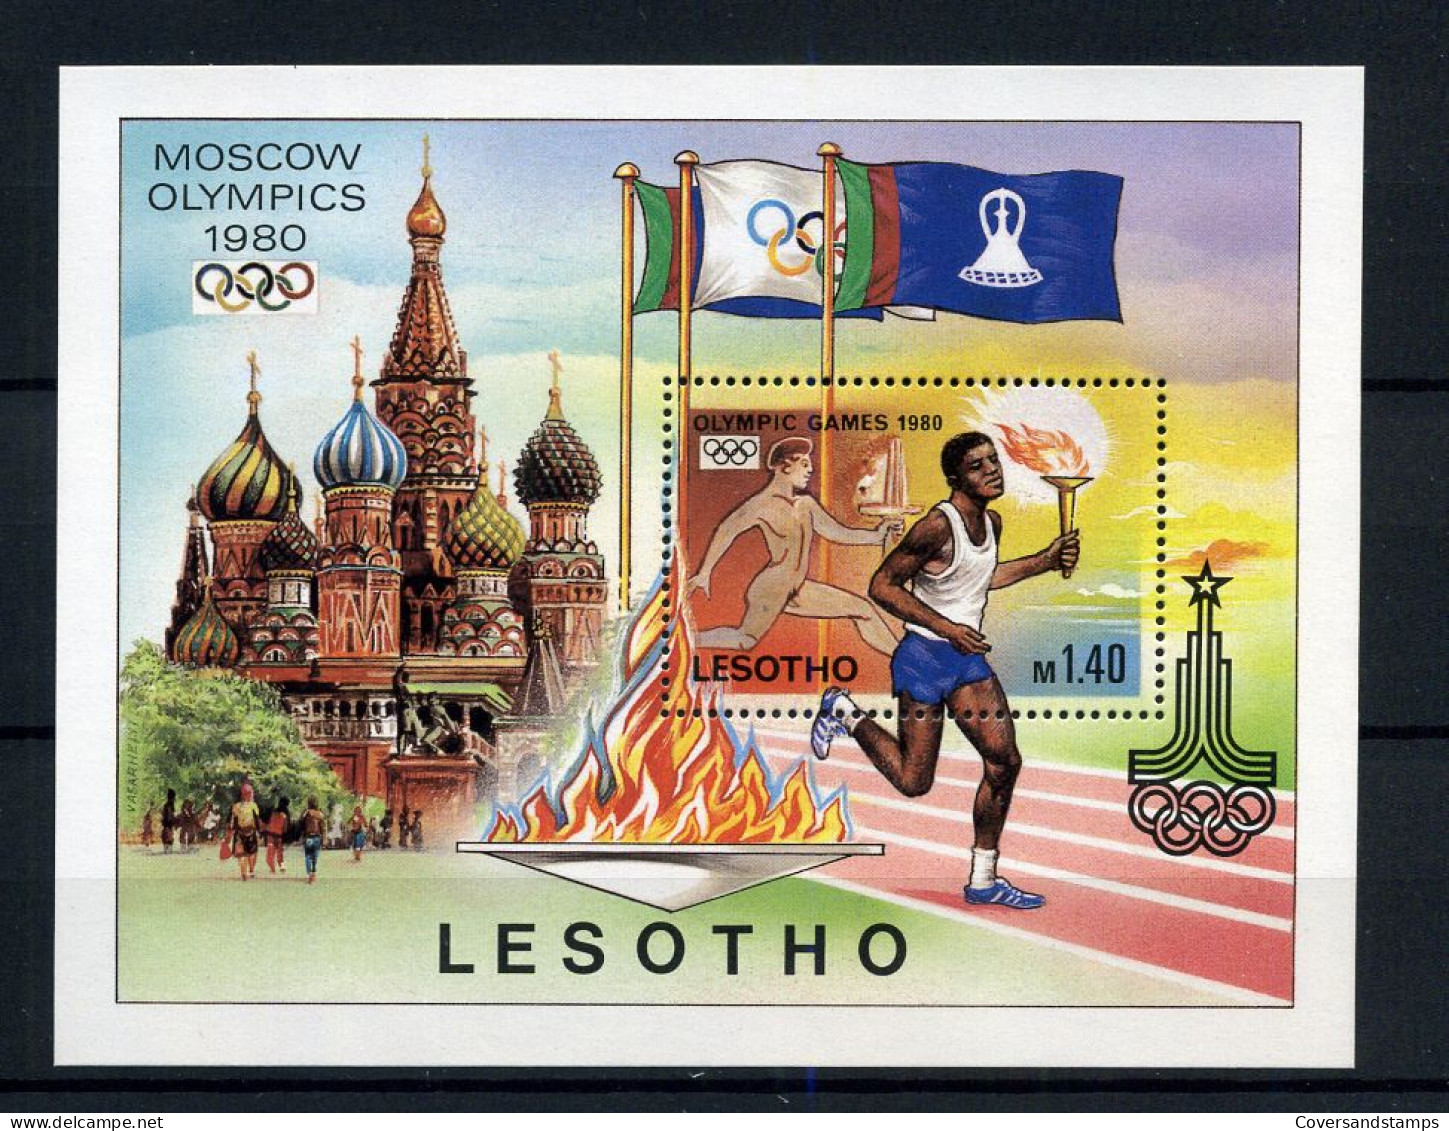 Lesotho - Moscow Olympics 1980 - Estate 1980: Mosca